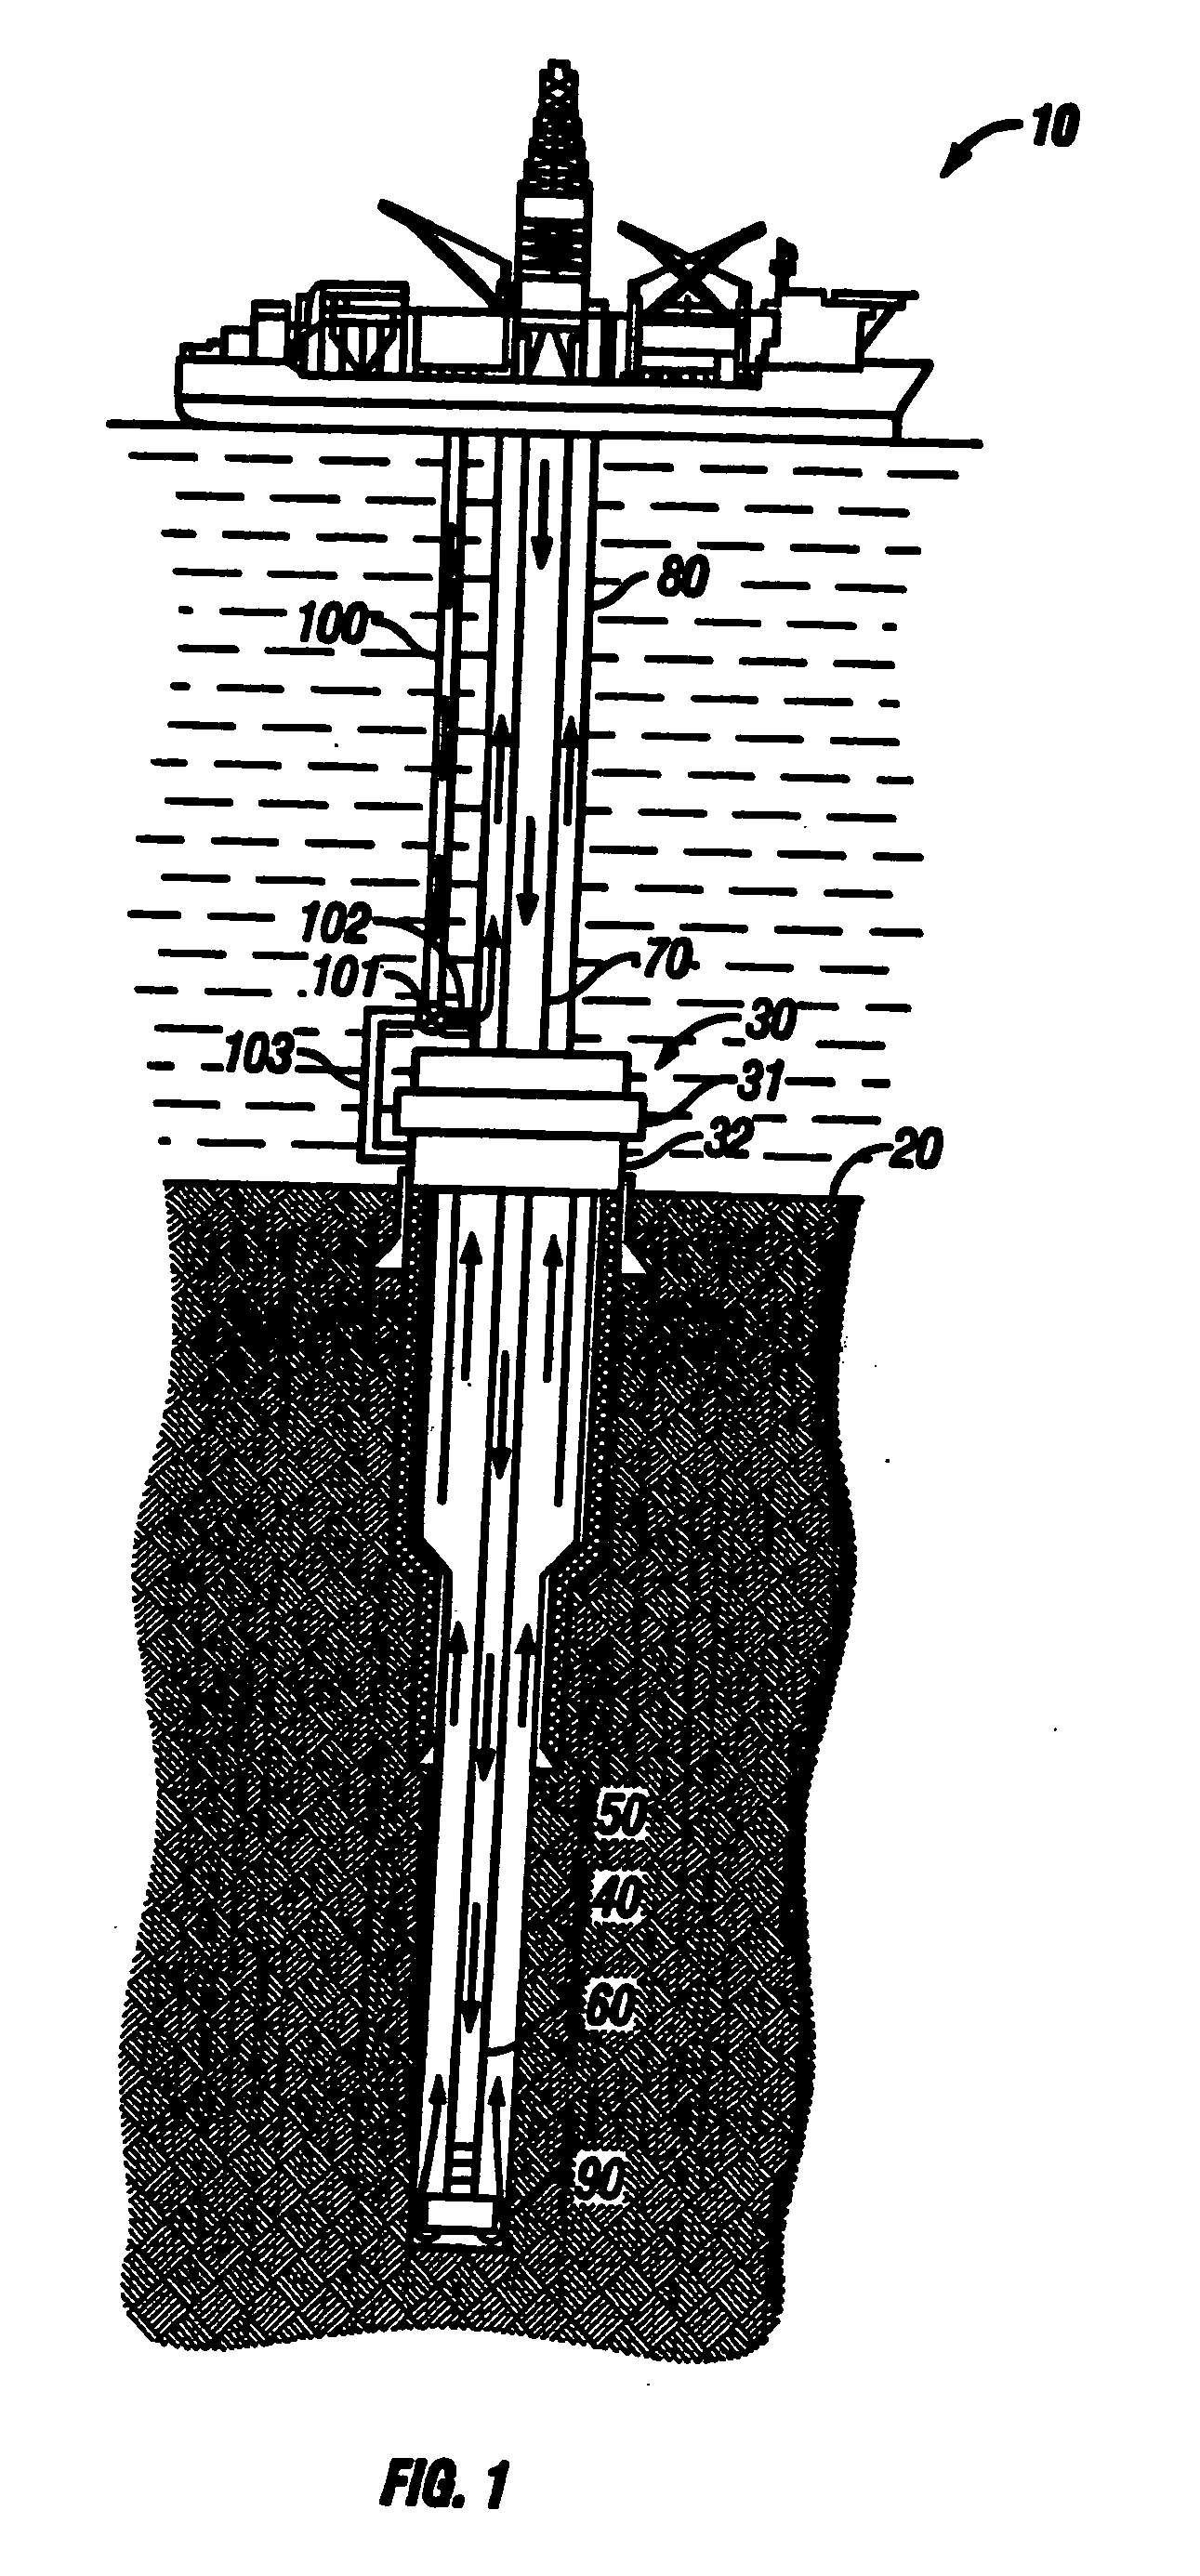 System for drilling oil and gas wells using a concentric drill string to deliver a dual density mud